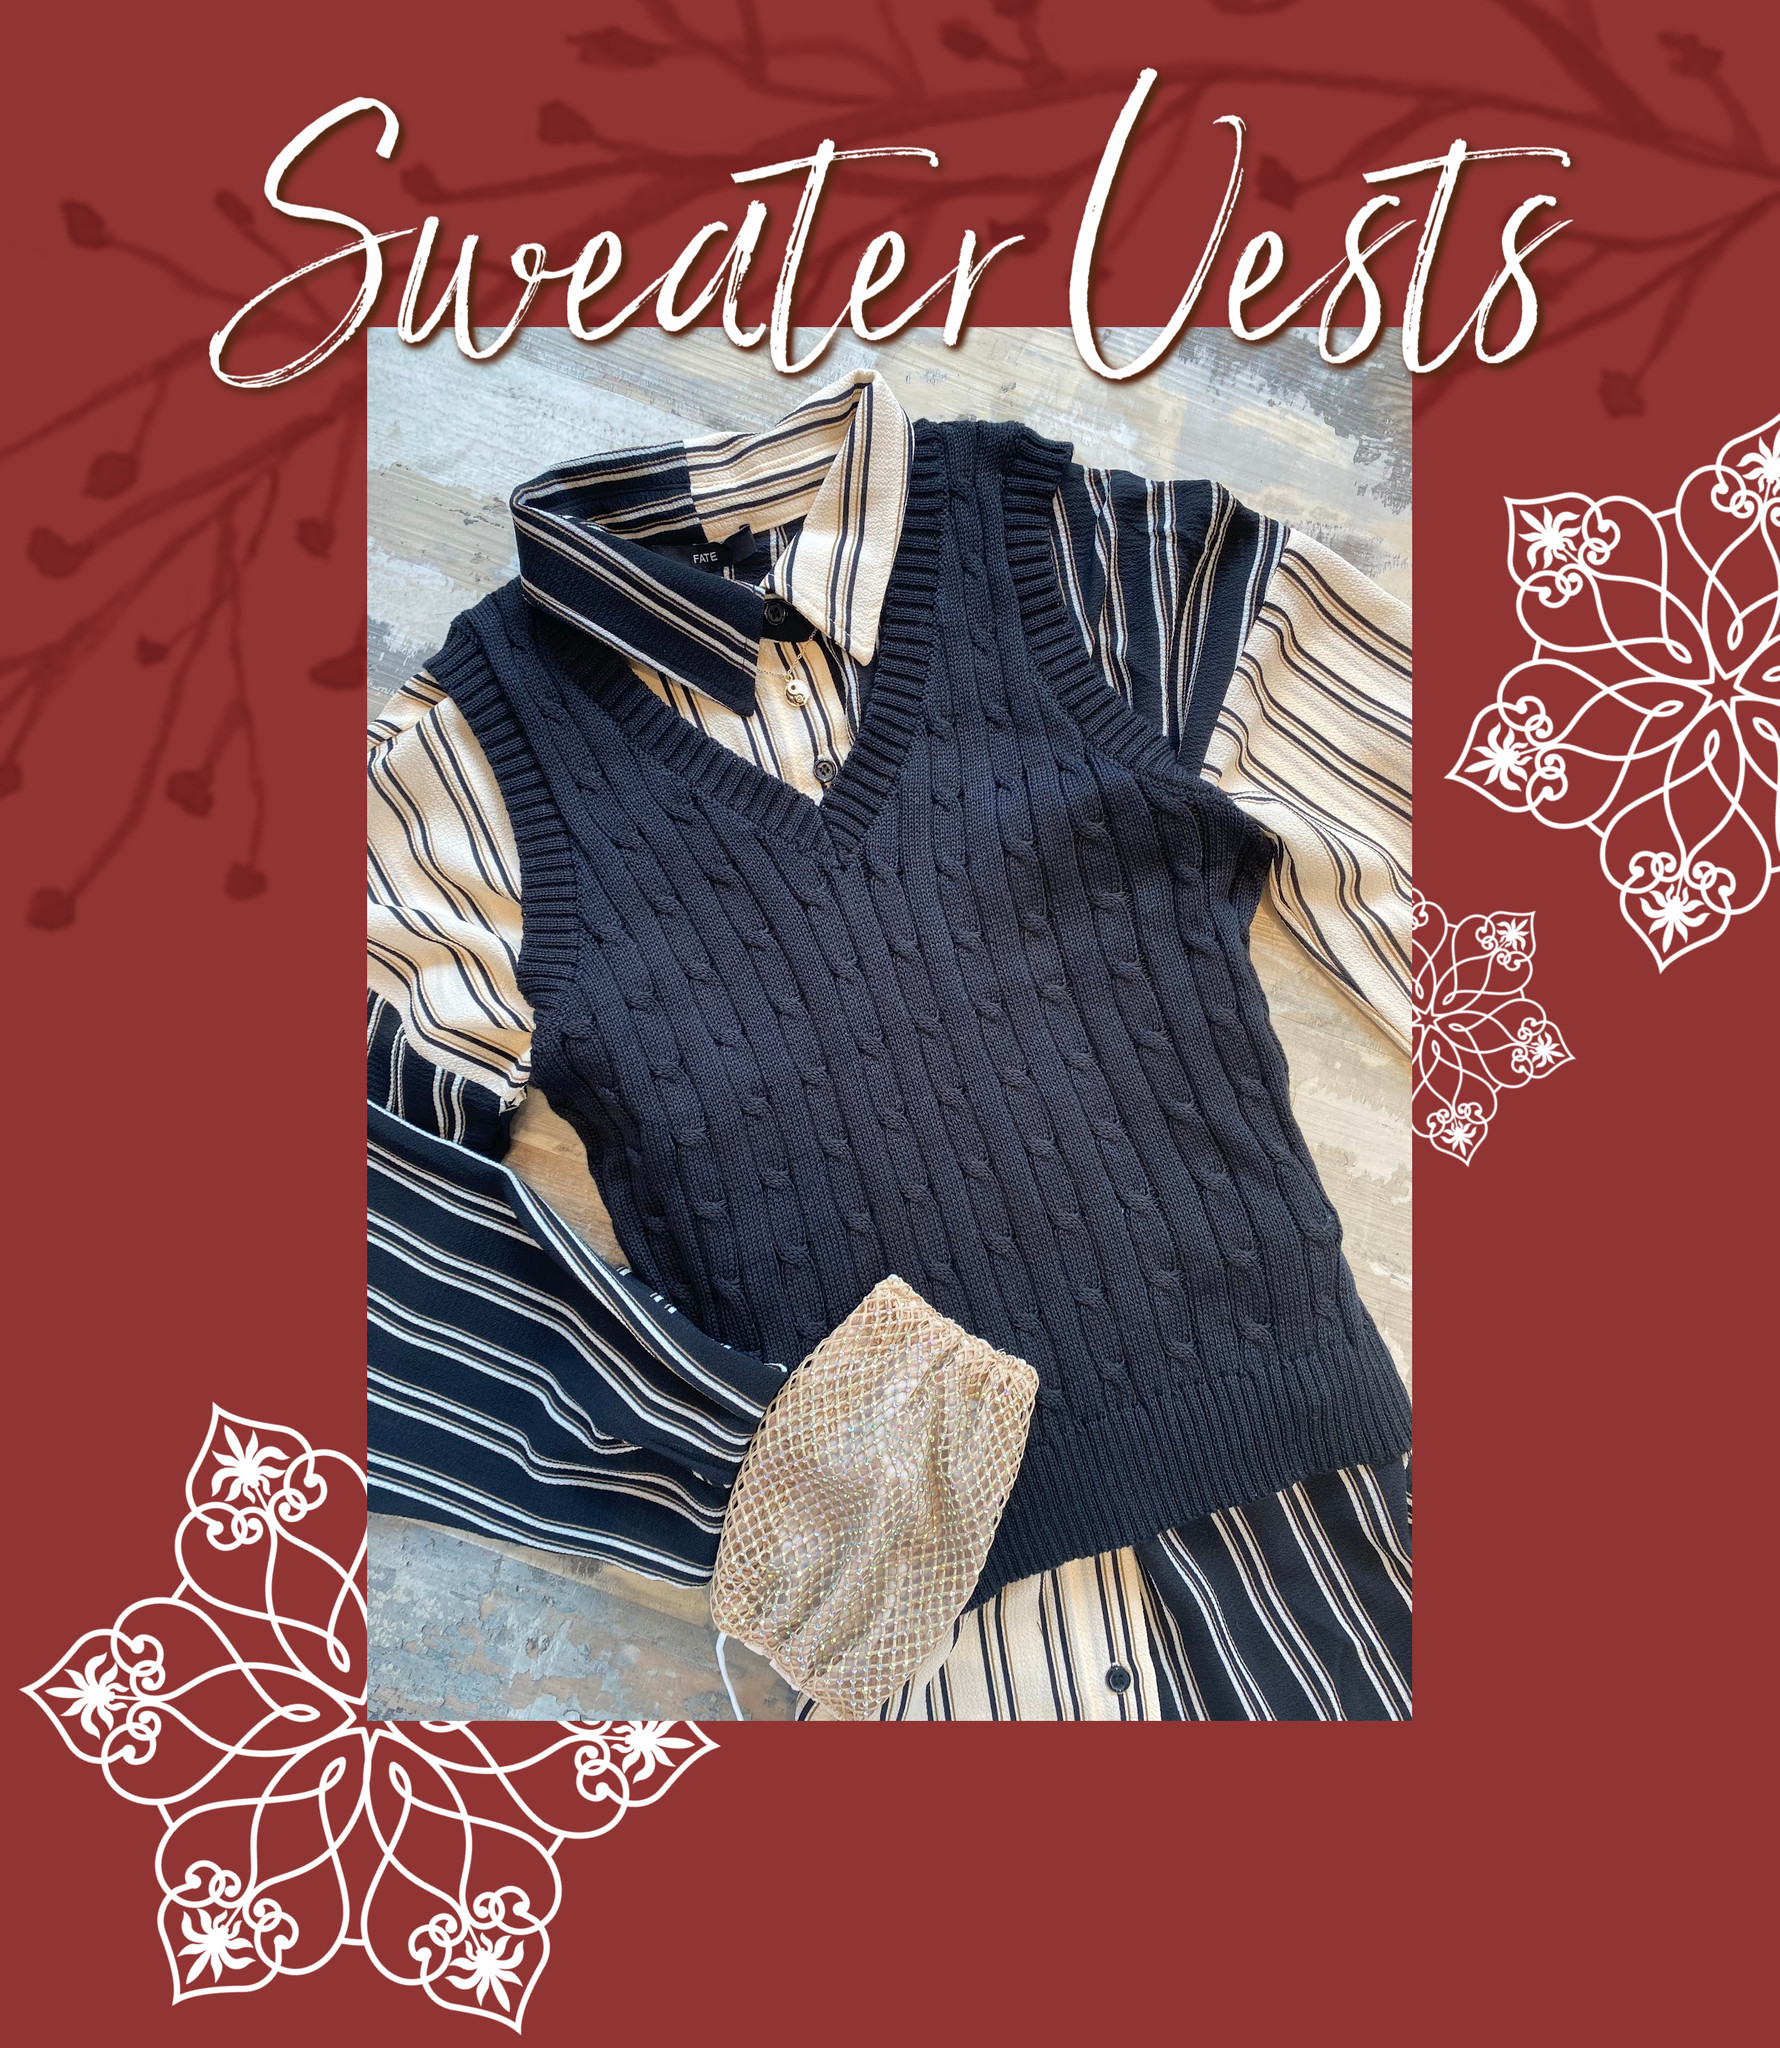 Sweater Vests are a must on your holiday shopping list this year. Featured here is a black braid knit sweater vest with a back and tan contrast collared blouse styled under, and to add some extra fun we have a yin and yang necklace and a tan sparkle face mask.